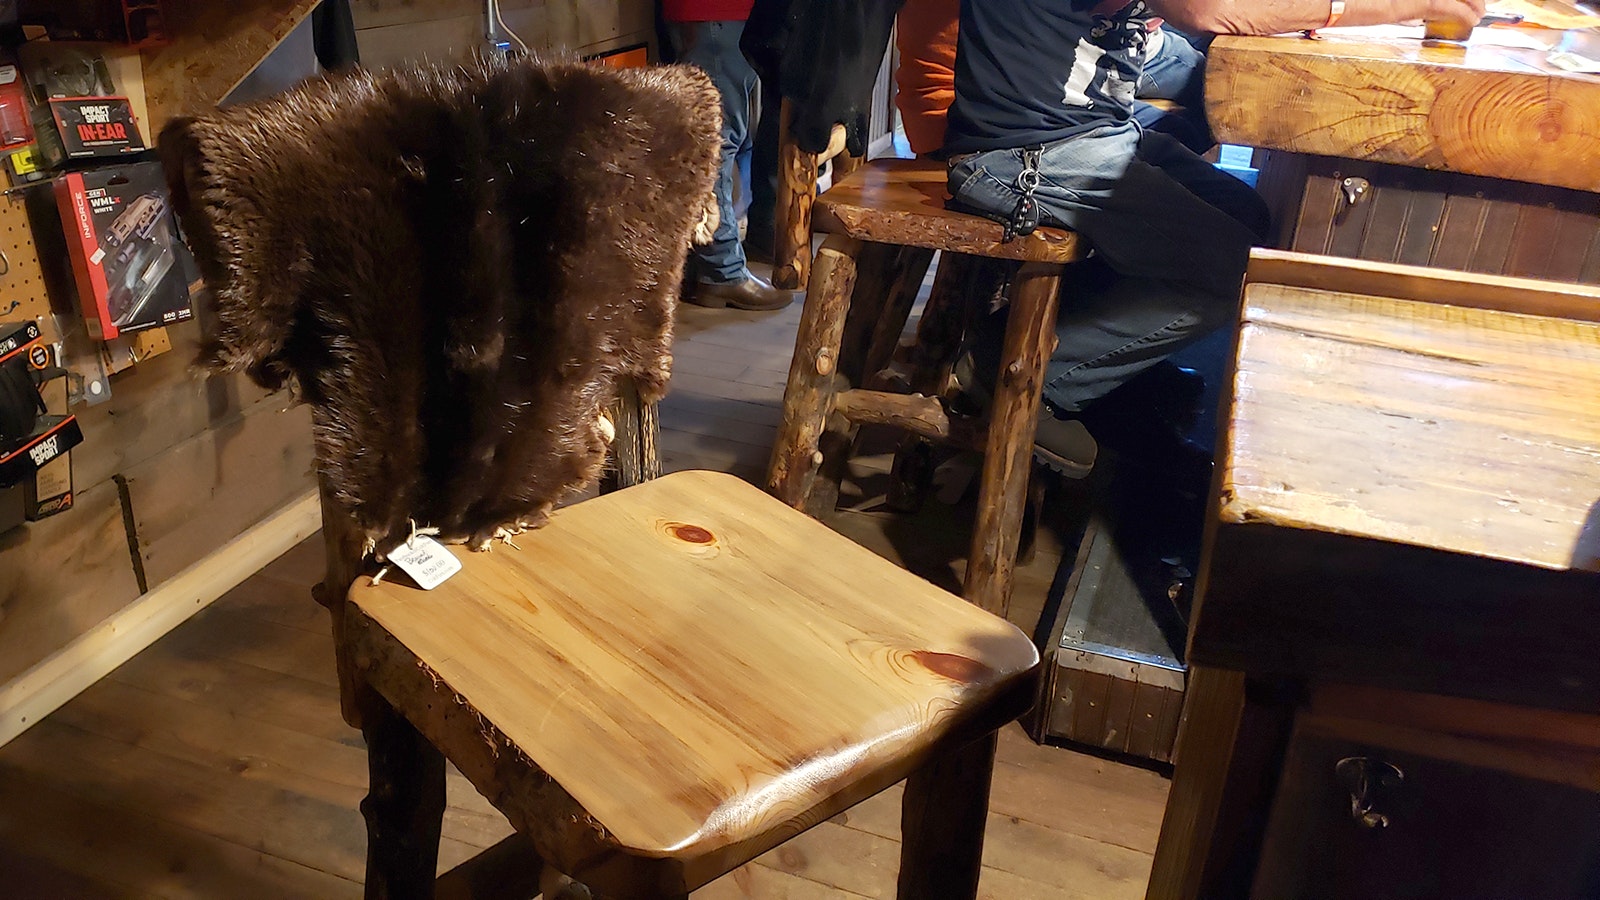 Furs that are for sale adorn each of the rustic chairs in the bar.